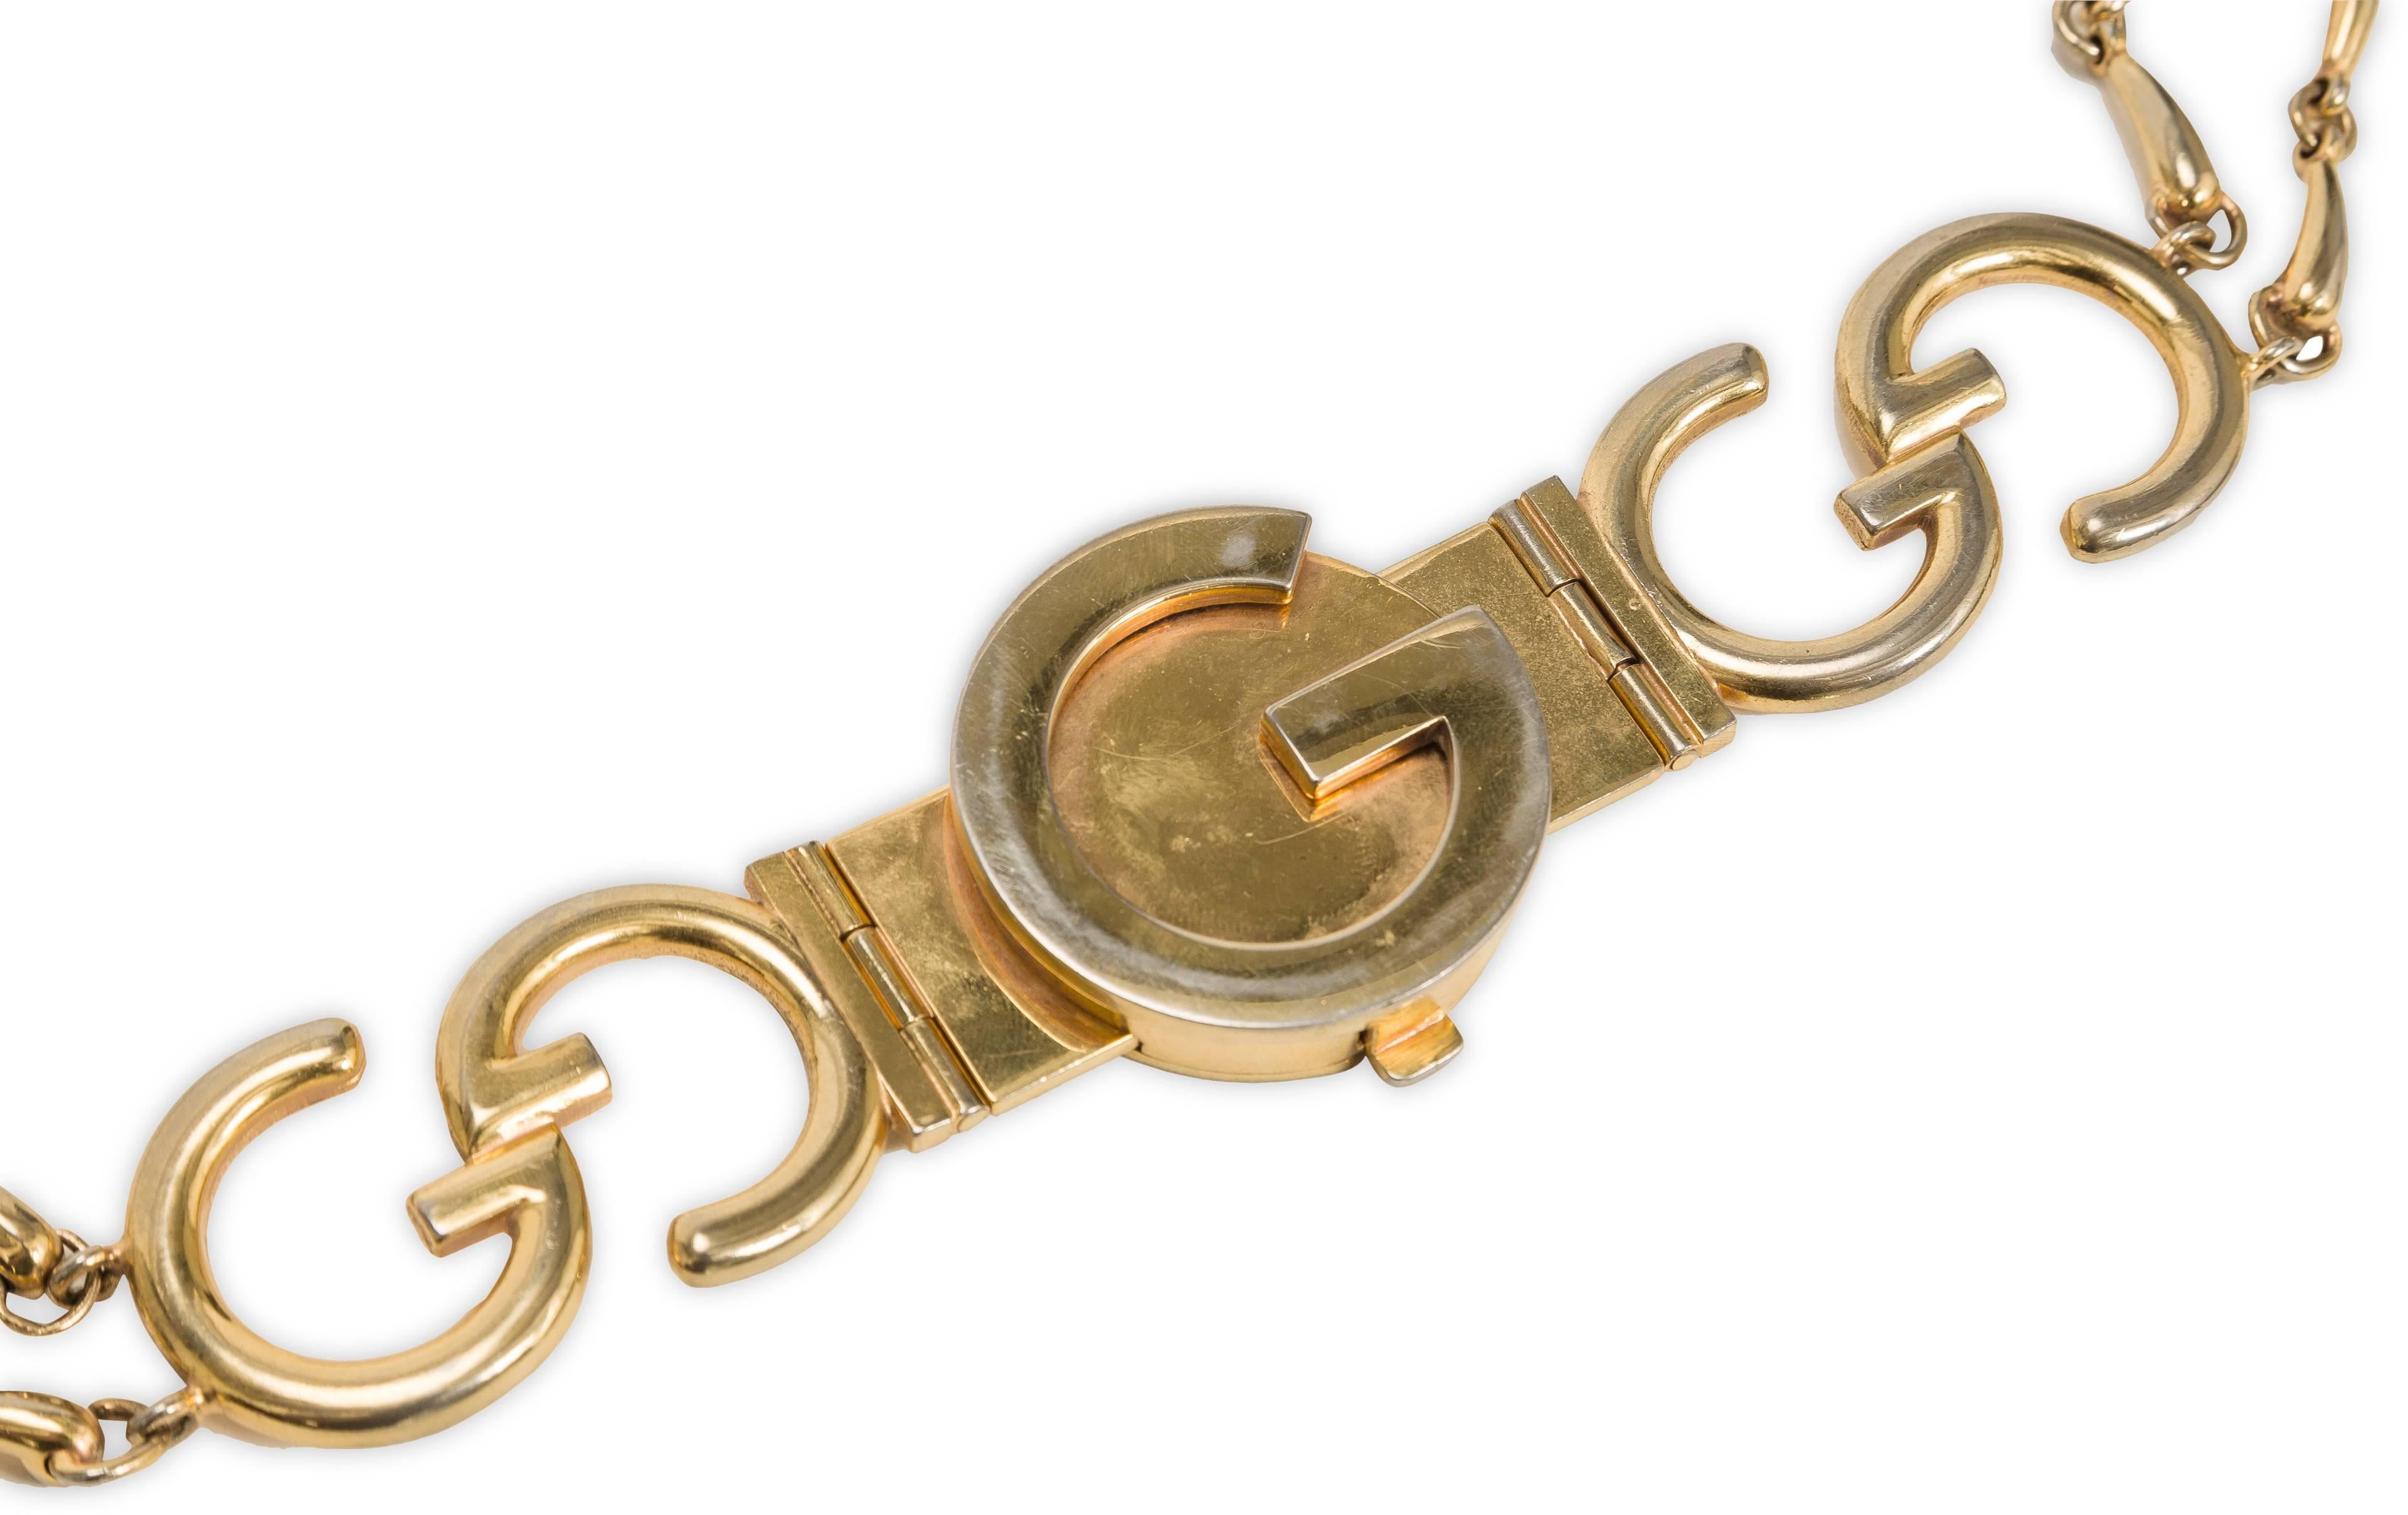 1970's Gucci gold tone belt featuring interlocking golden metal Gucci GG logo and horsebit-inspired links. To fasten, the 